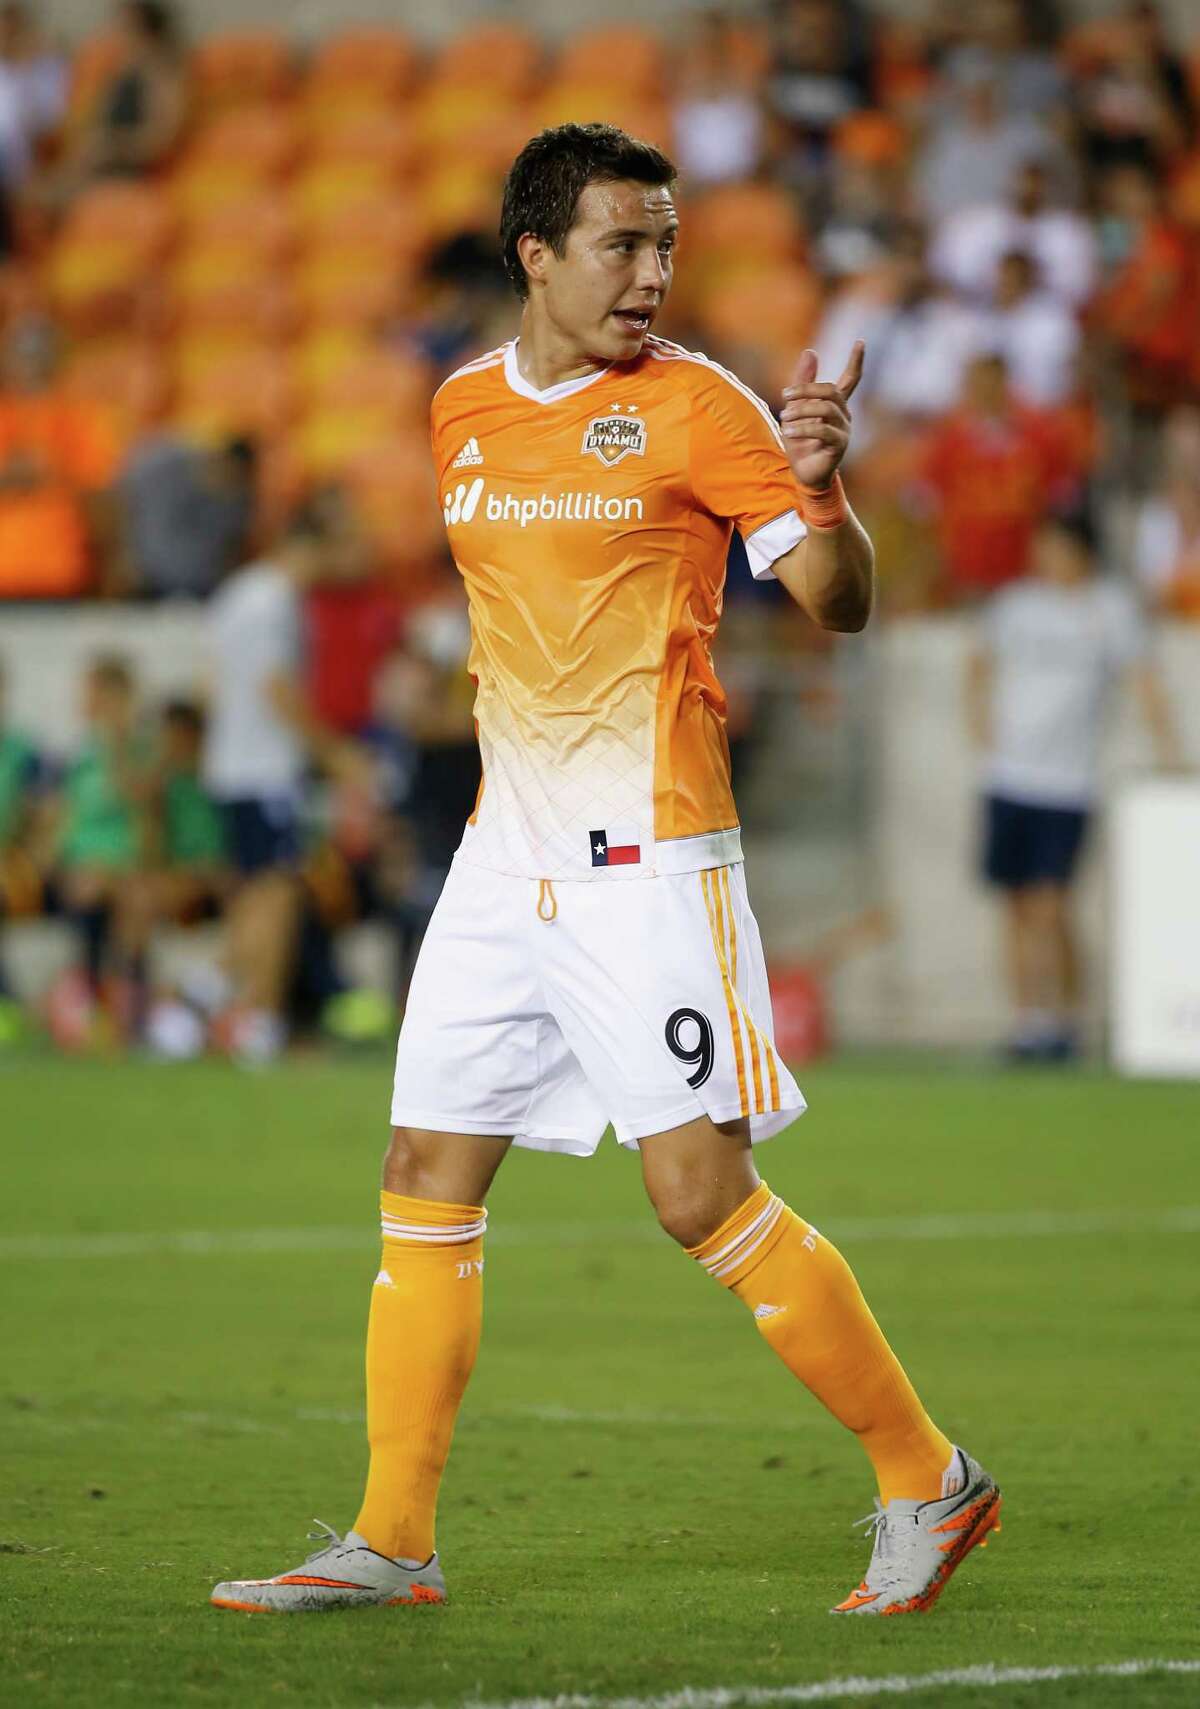 HOUSTON, TX - JULY 25: Erick Torres #9 of the Houston Dynamo walks across the field during their game against the Los Angeles Galaxy at BBVA Compass Stadium on July 25, 2015 in Houston, Texas.